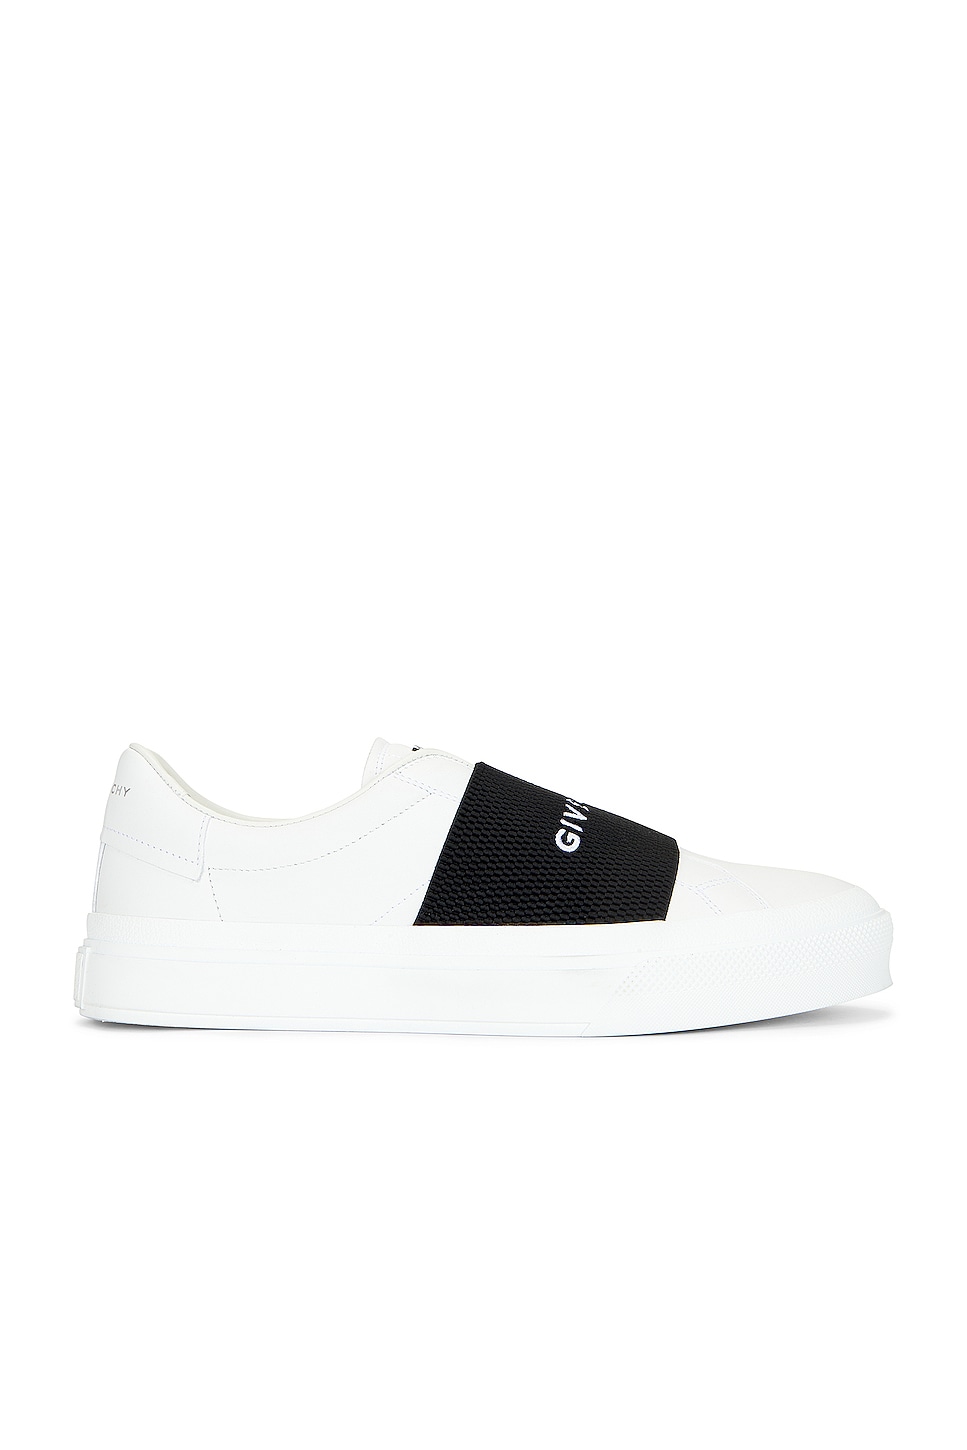 Image 1 of Givenchy Elastic Sneakers in White & Black